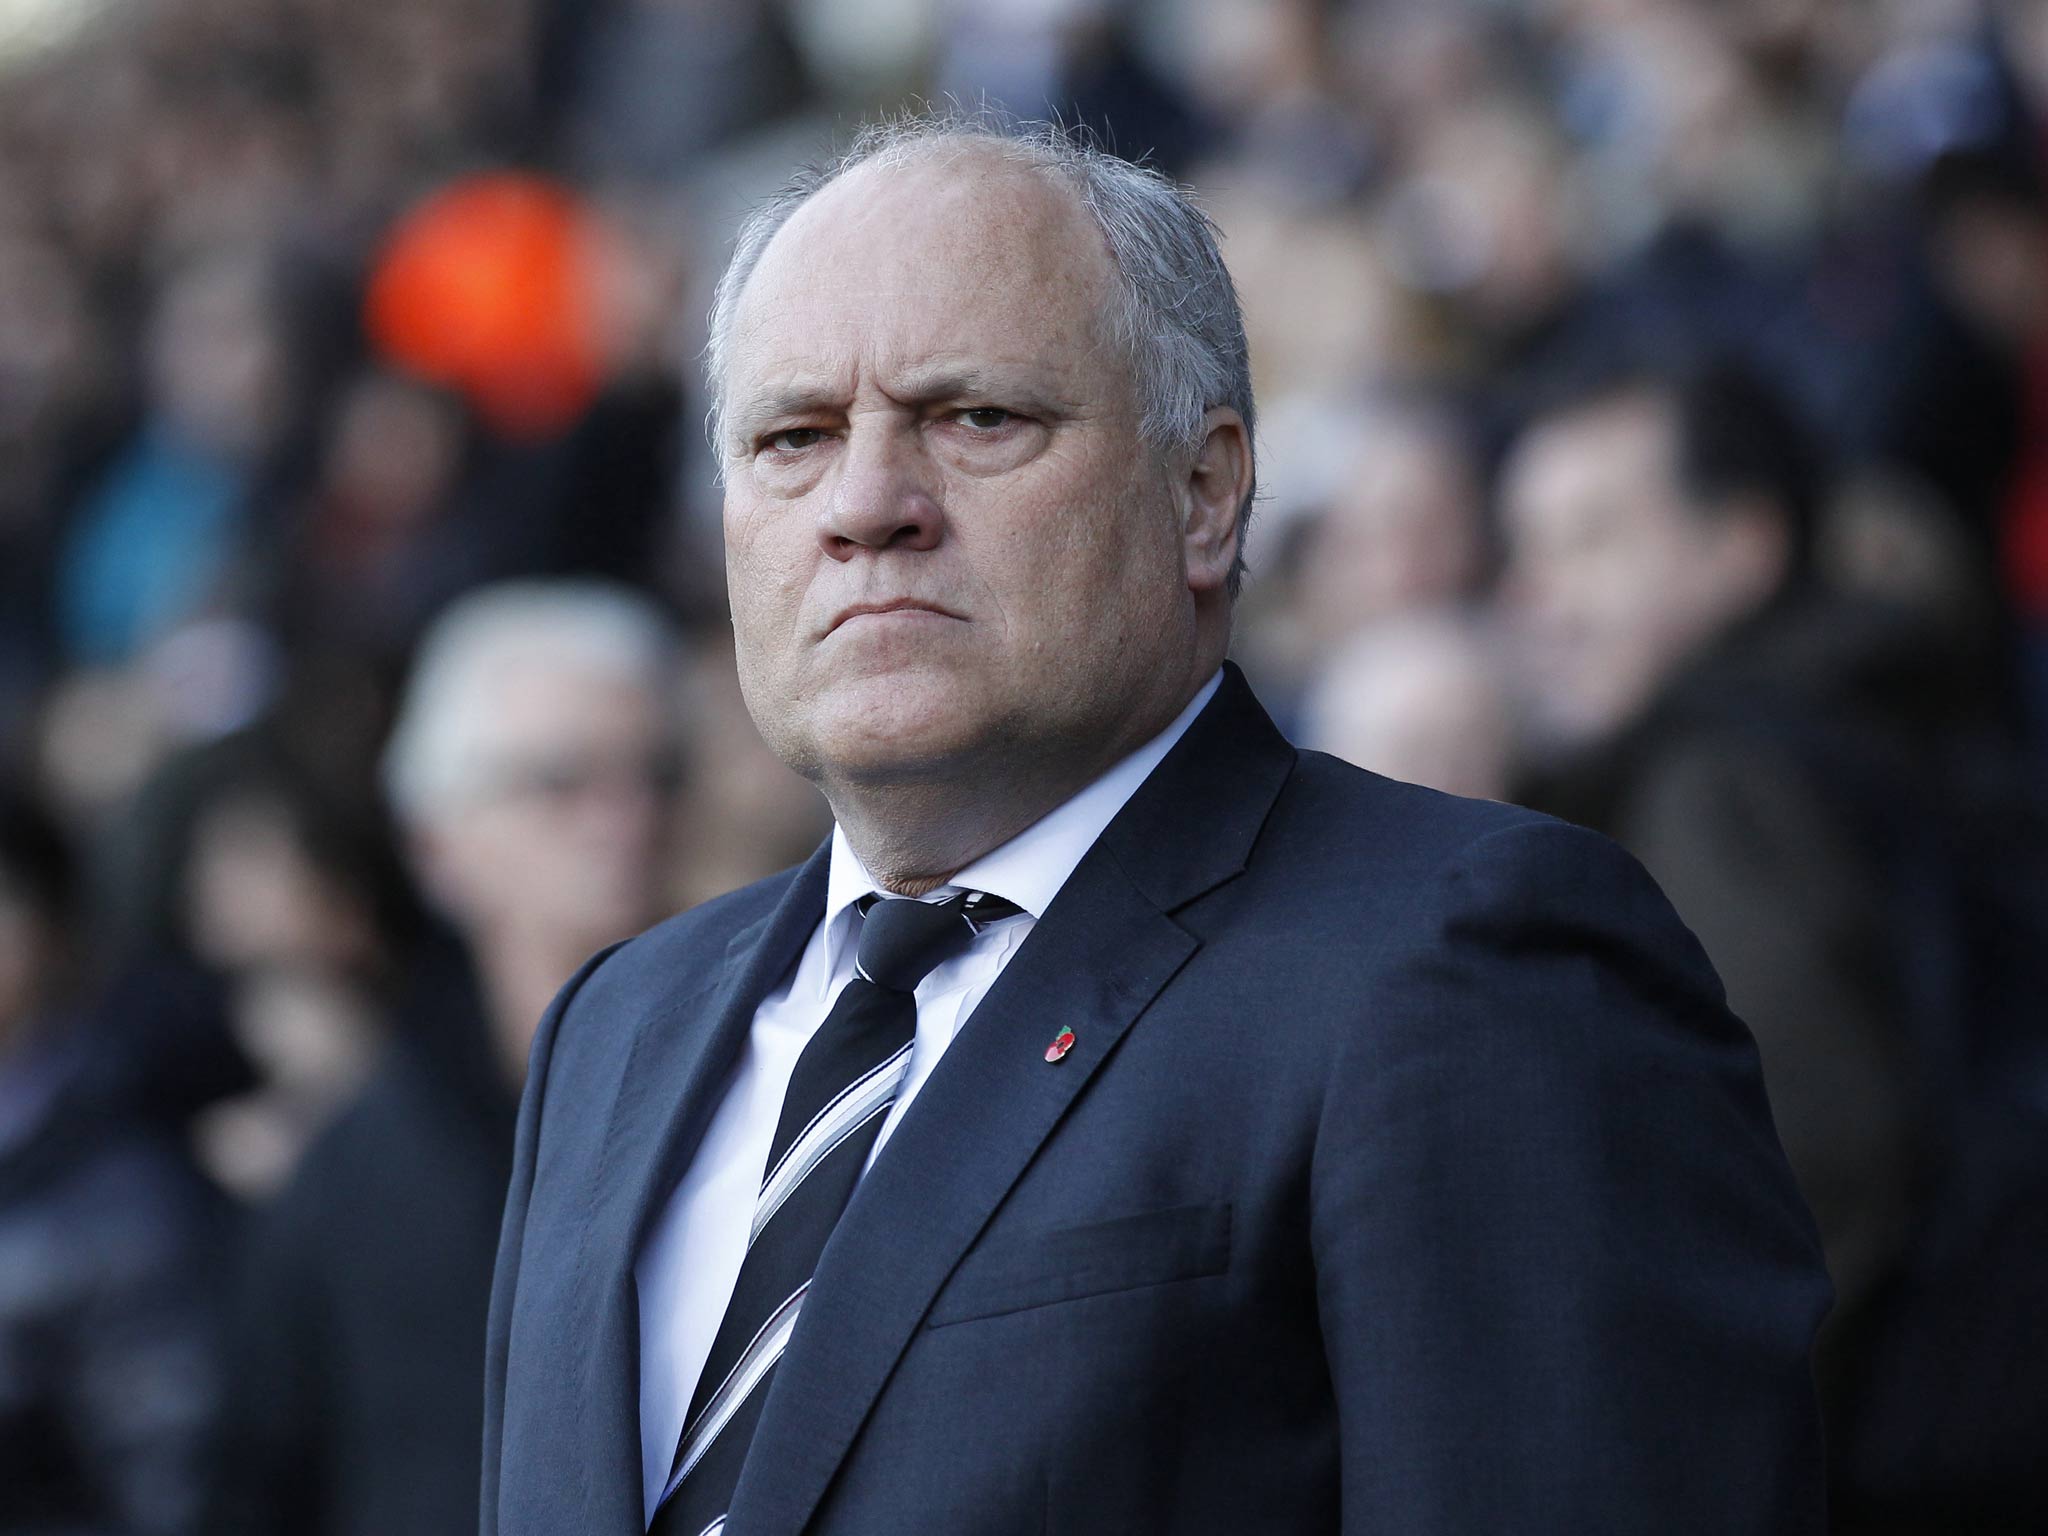 Fulham, managed by Martin Jol, face Liverpool at Anfield